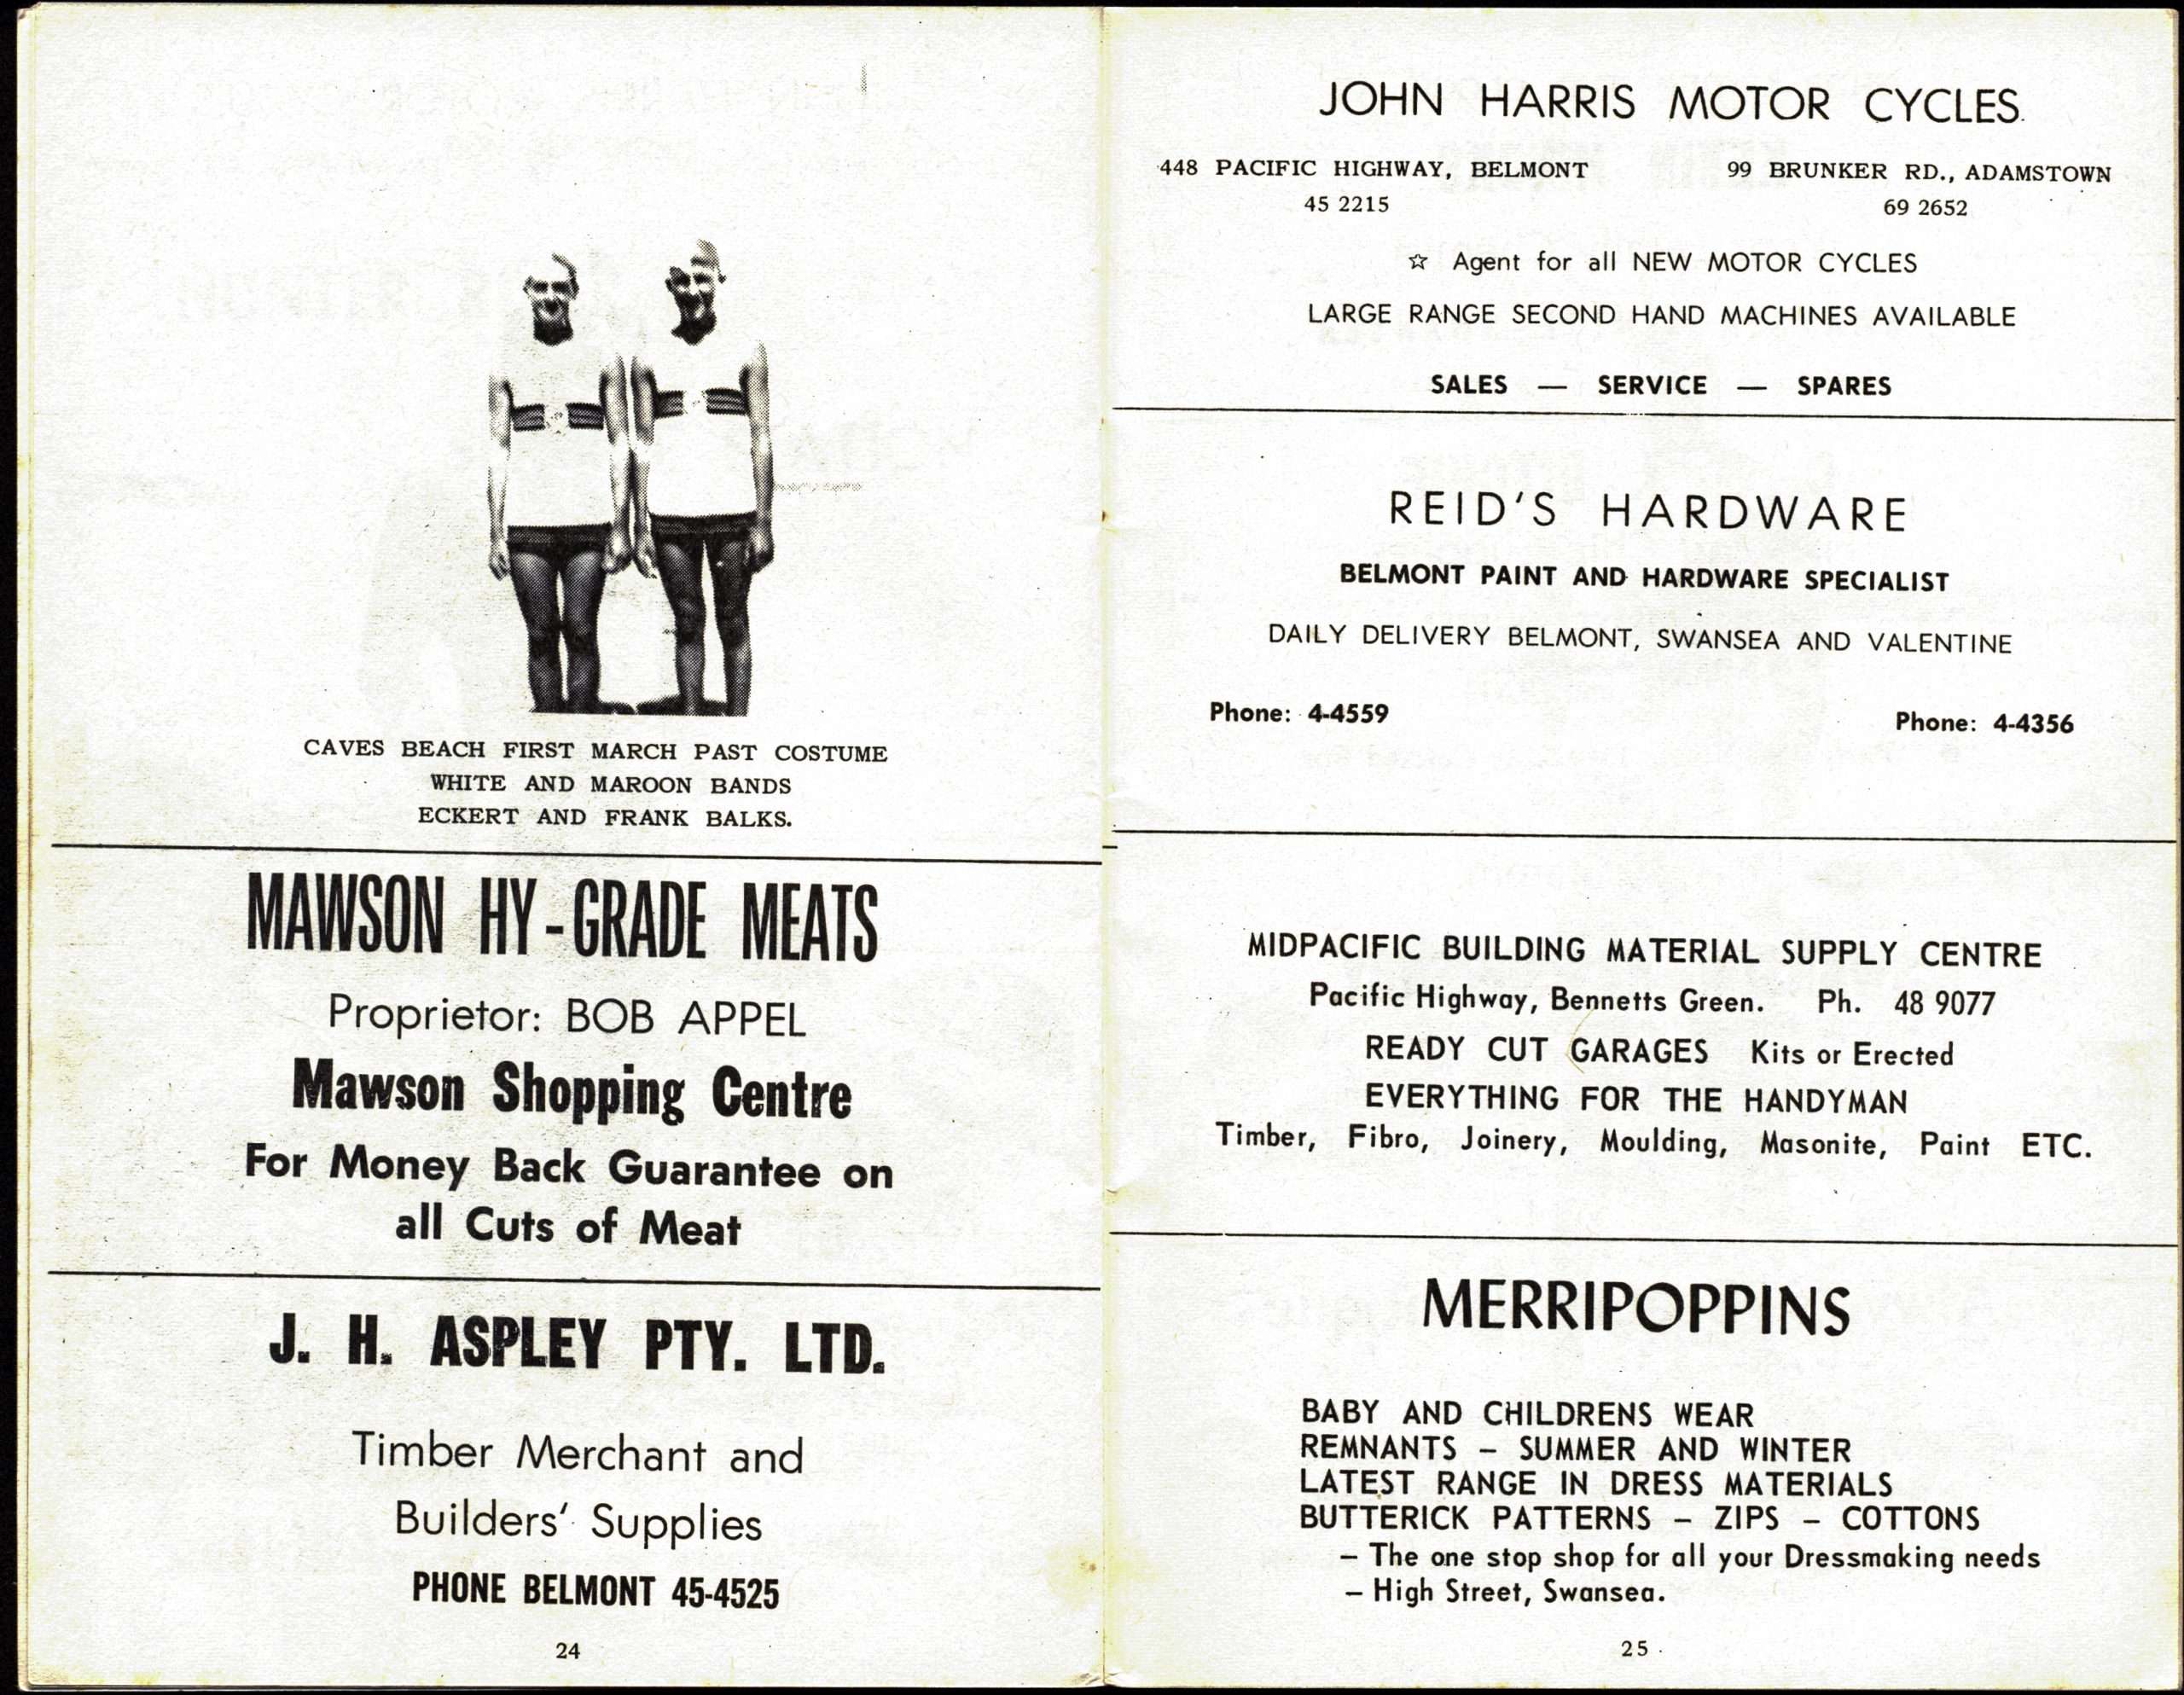 Programme pages with local advertisements including a black and white photograph of two life savers in March Past uniforms, including a swim cap, shorts, and singlet.